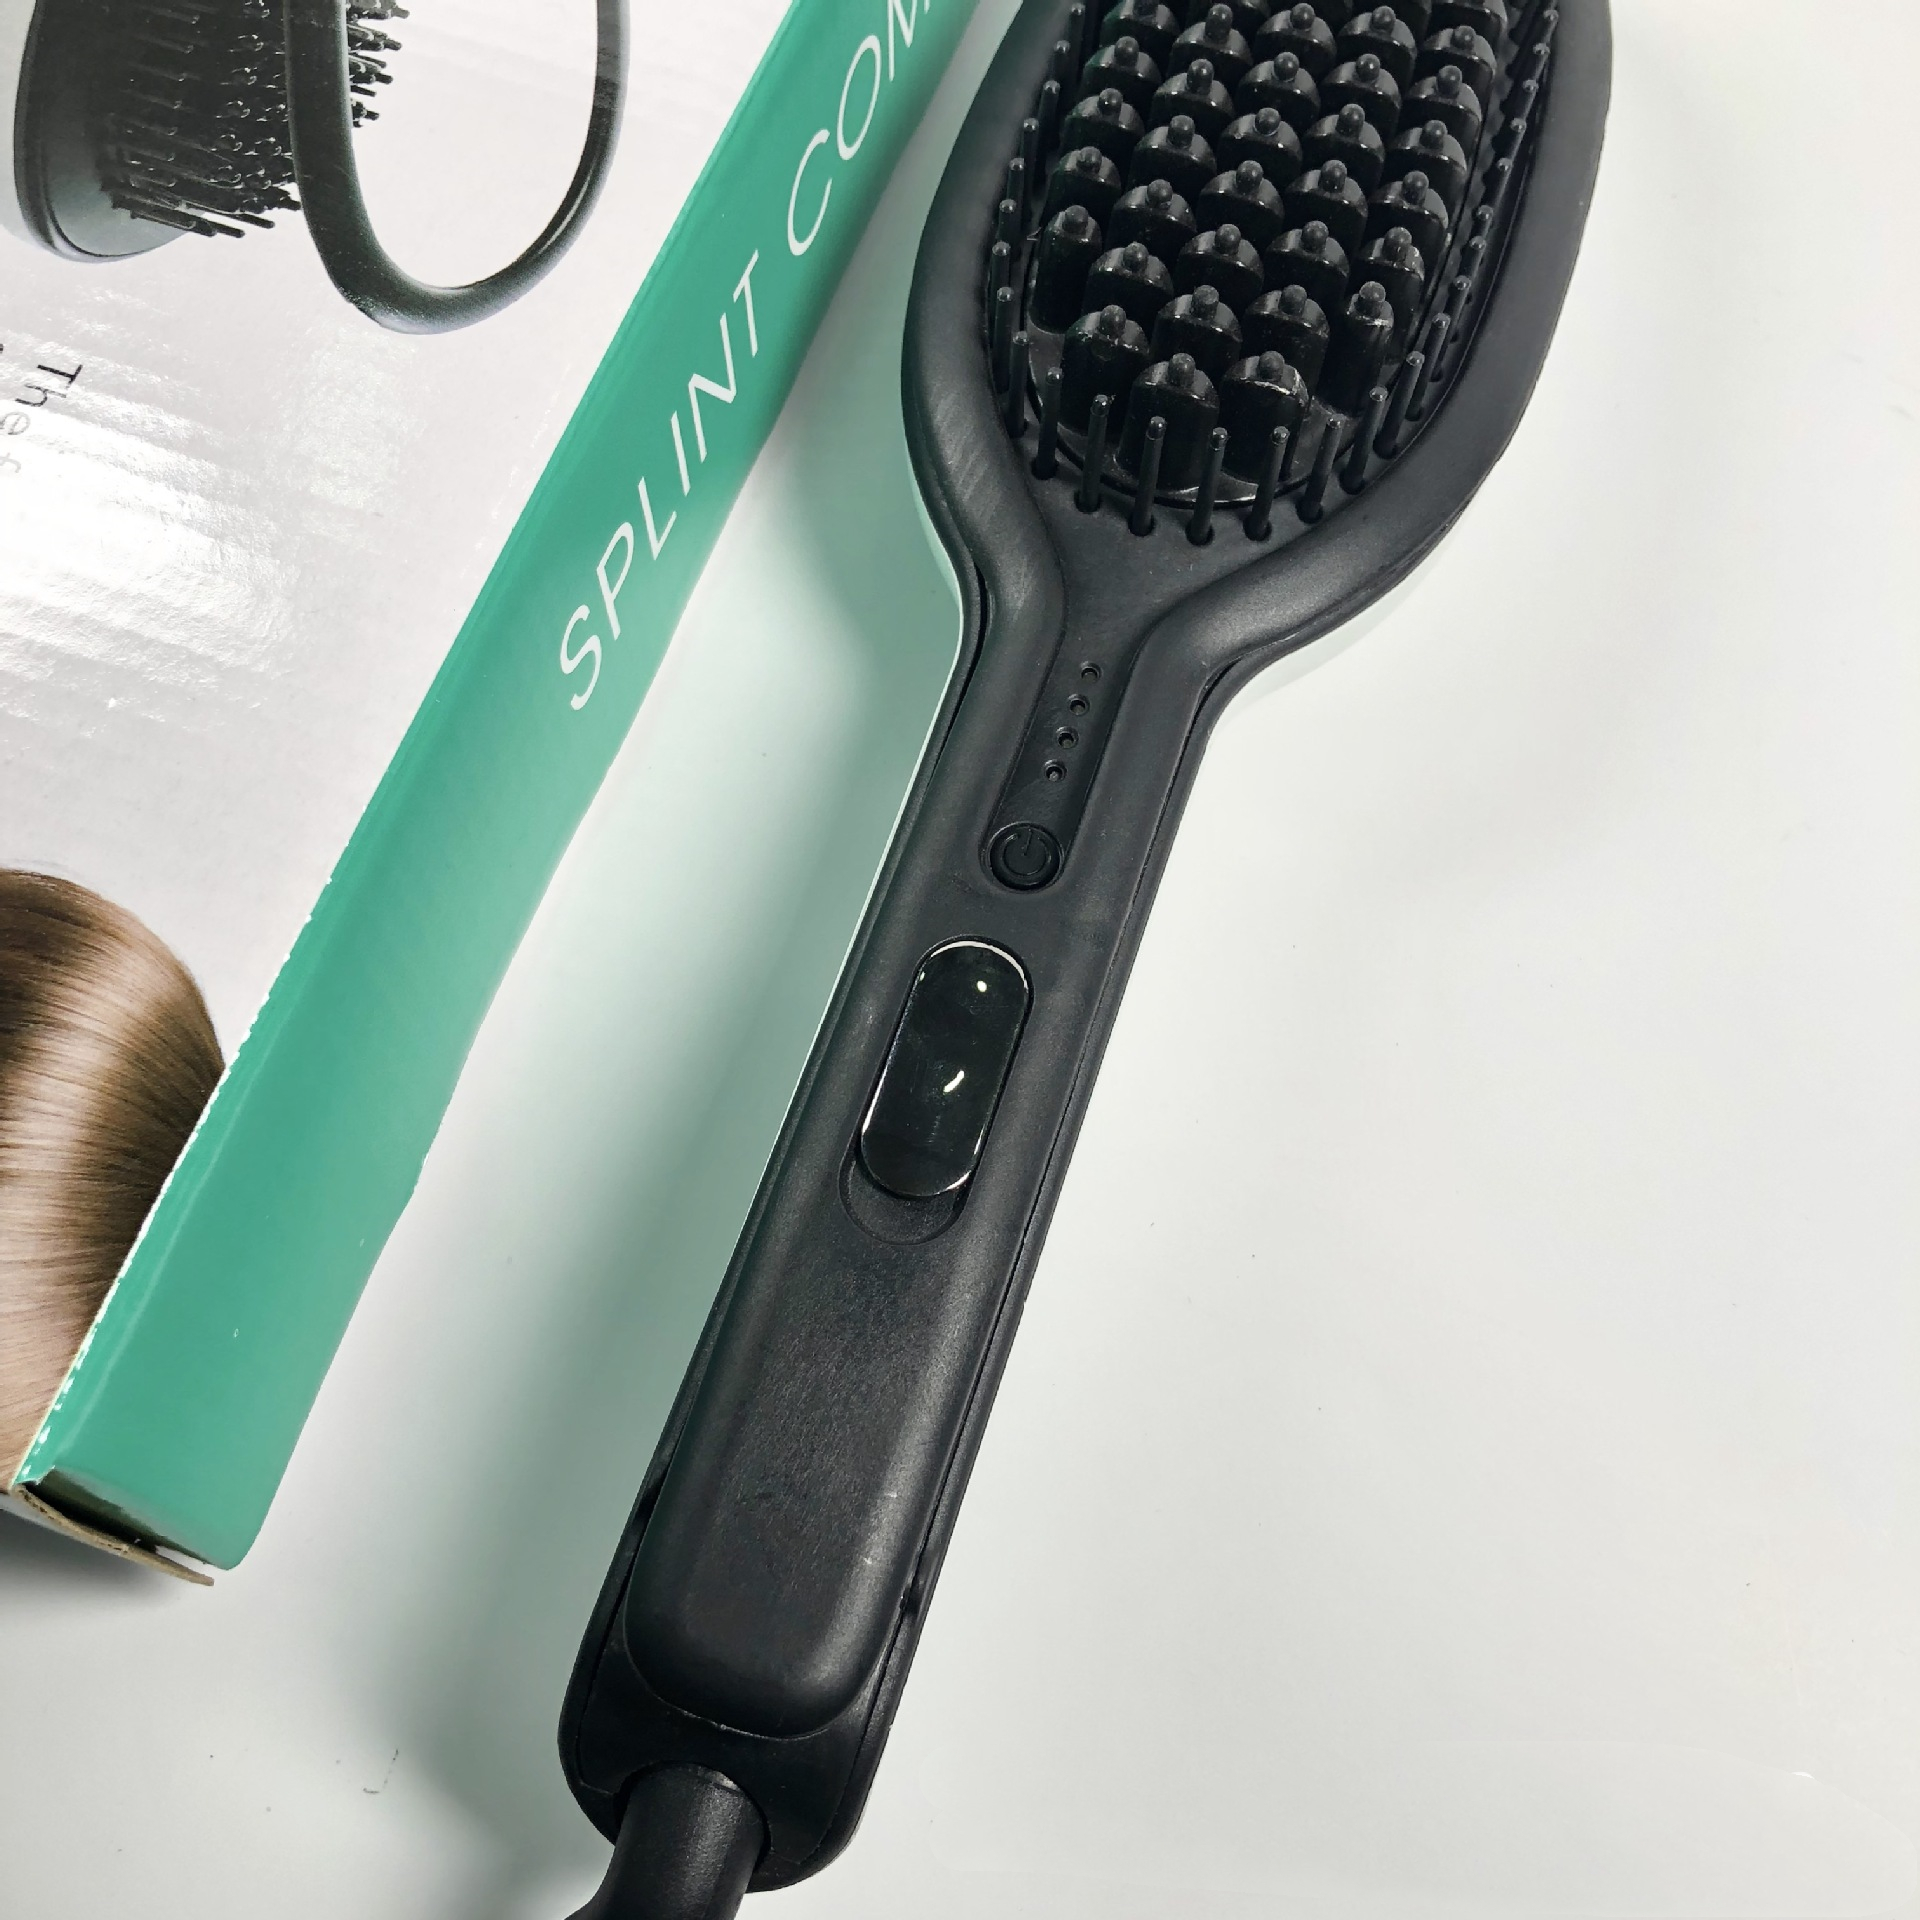 Effortlessly style hair with precision using Explosive Style Hairdresser Splint Straight Hair Comb, available now in-store. image 2